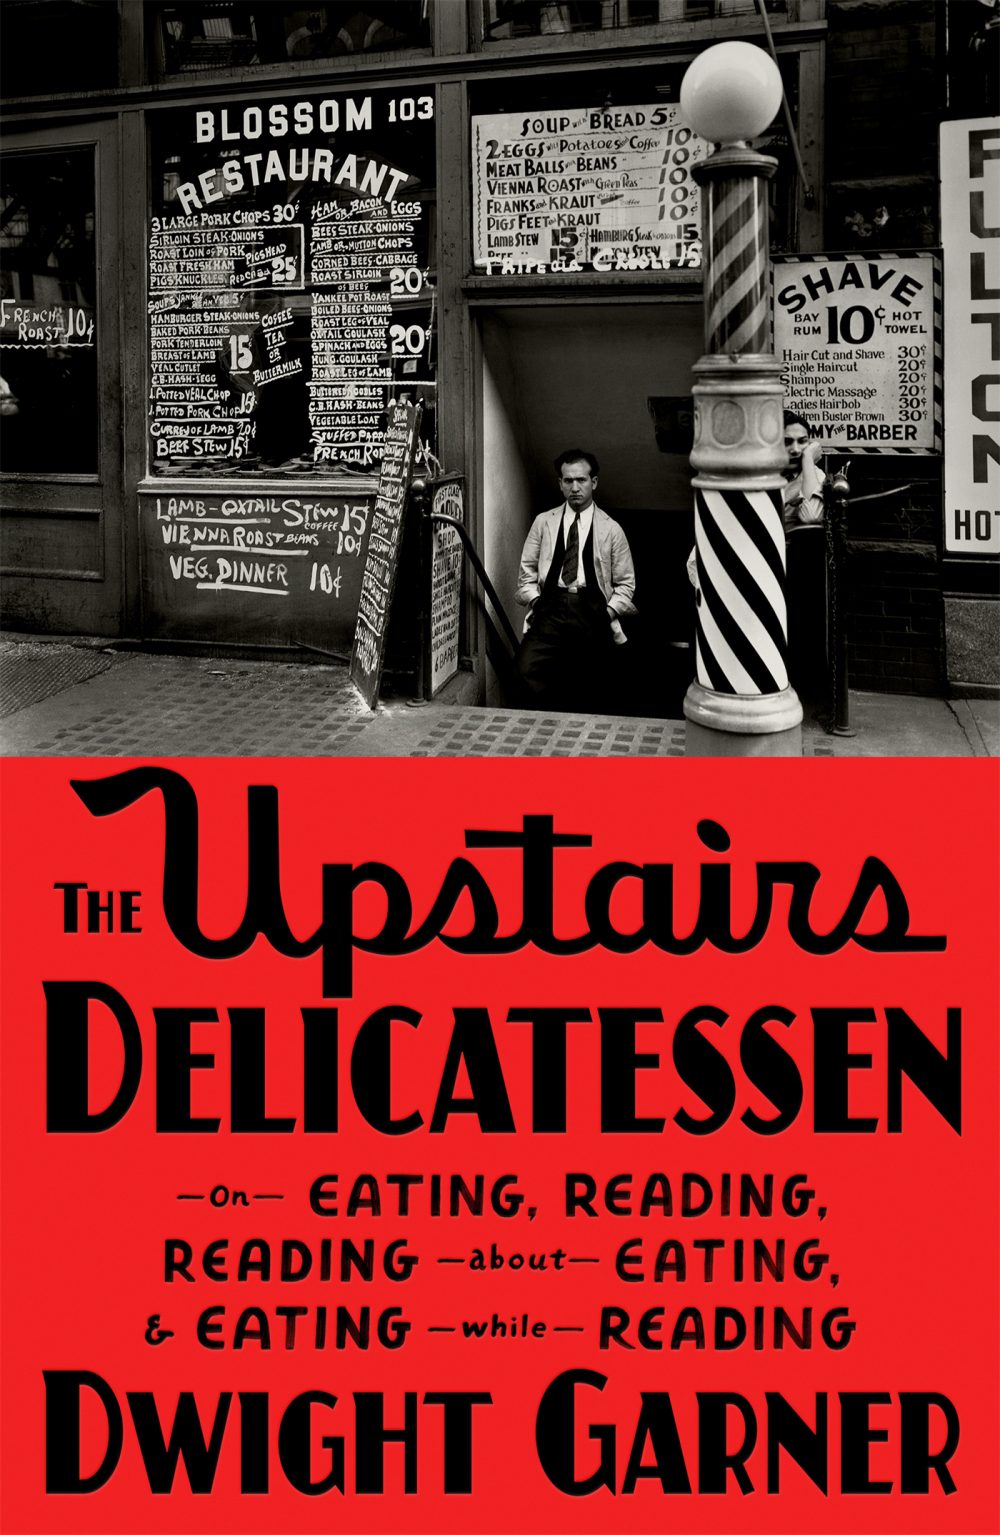 Book Review i43 The Upstairs Delicatessen